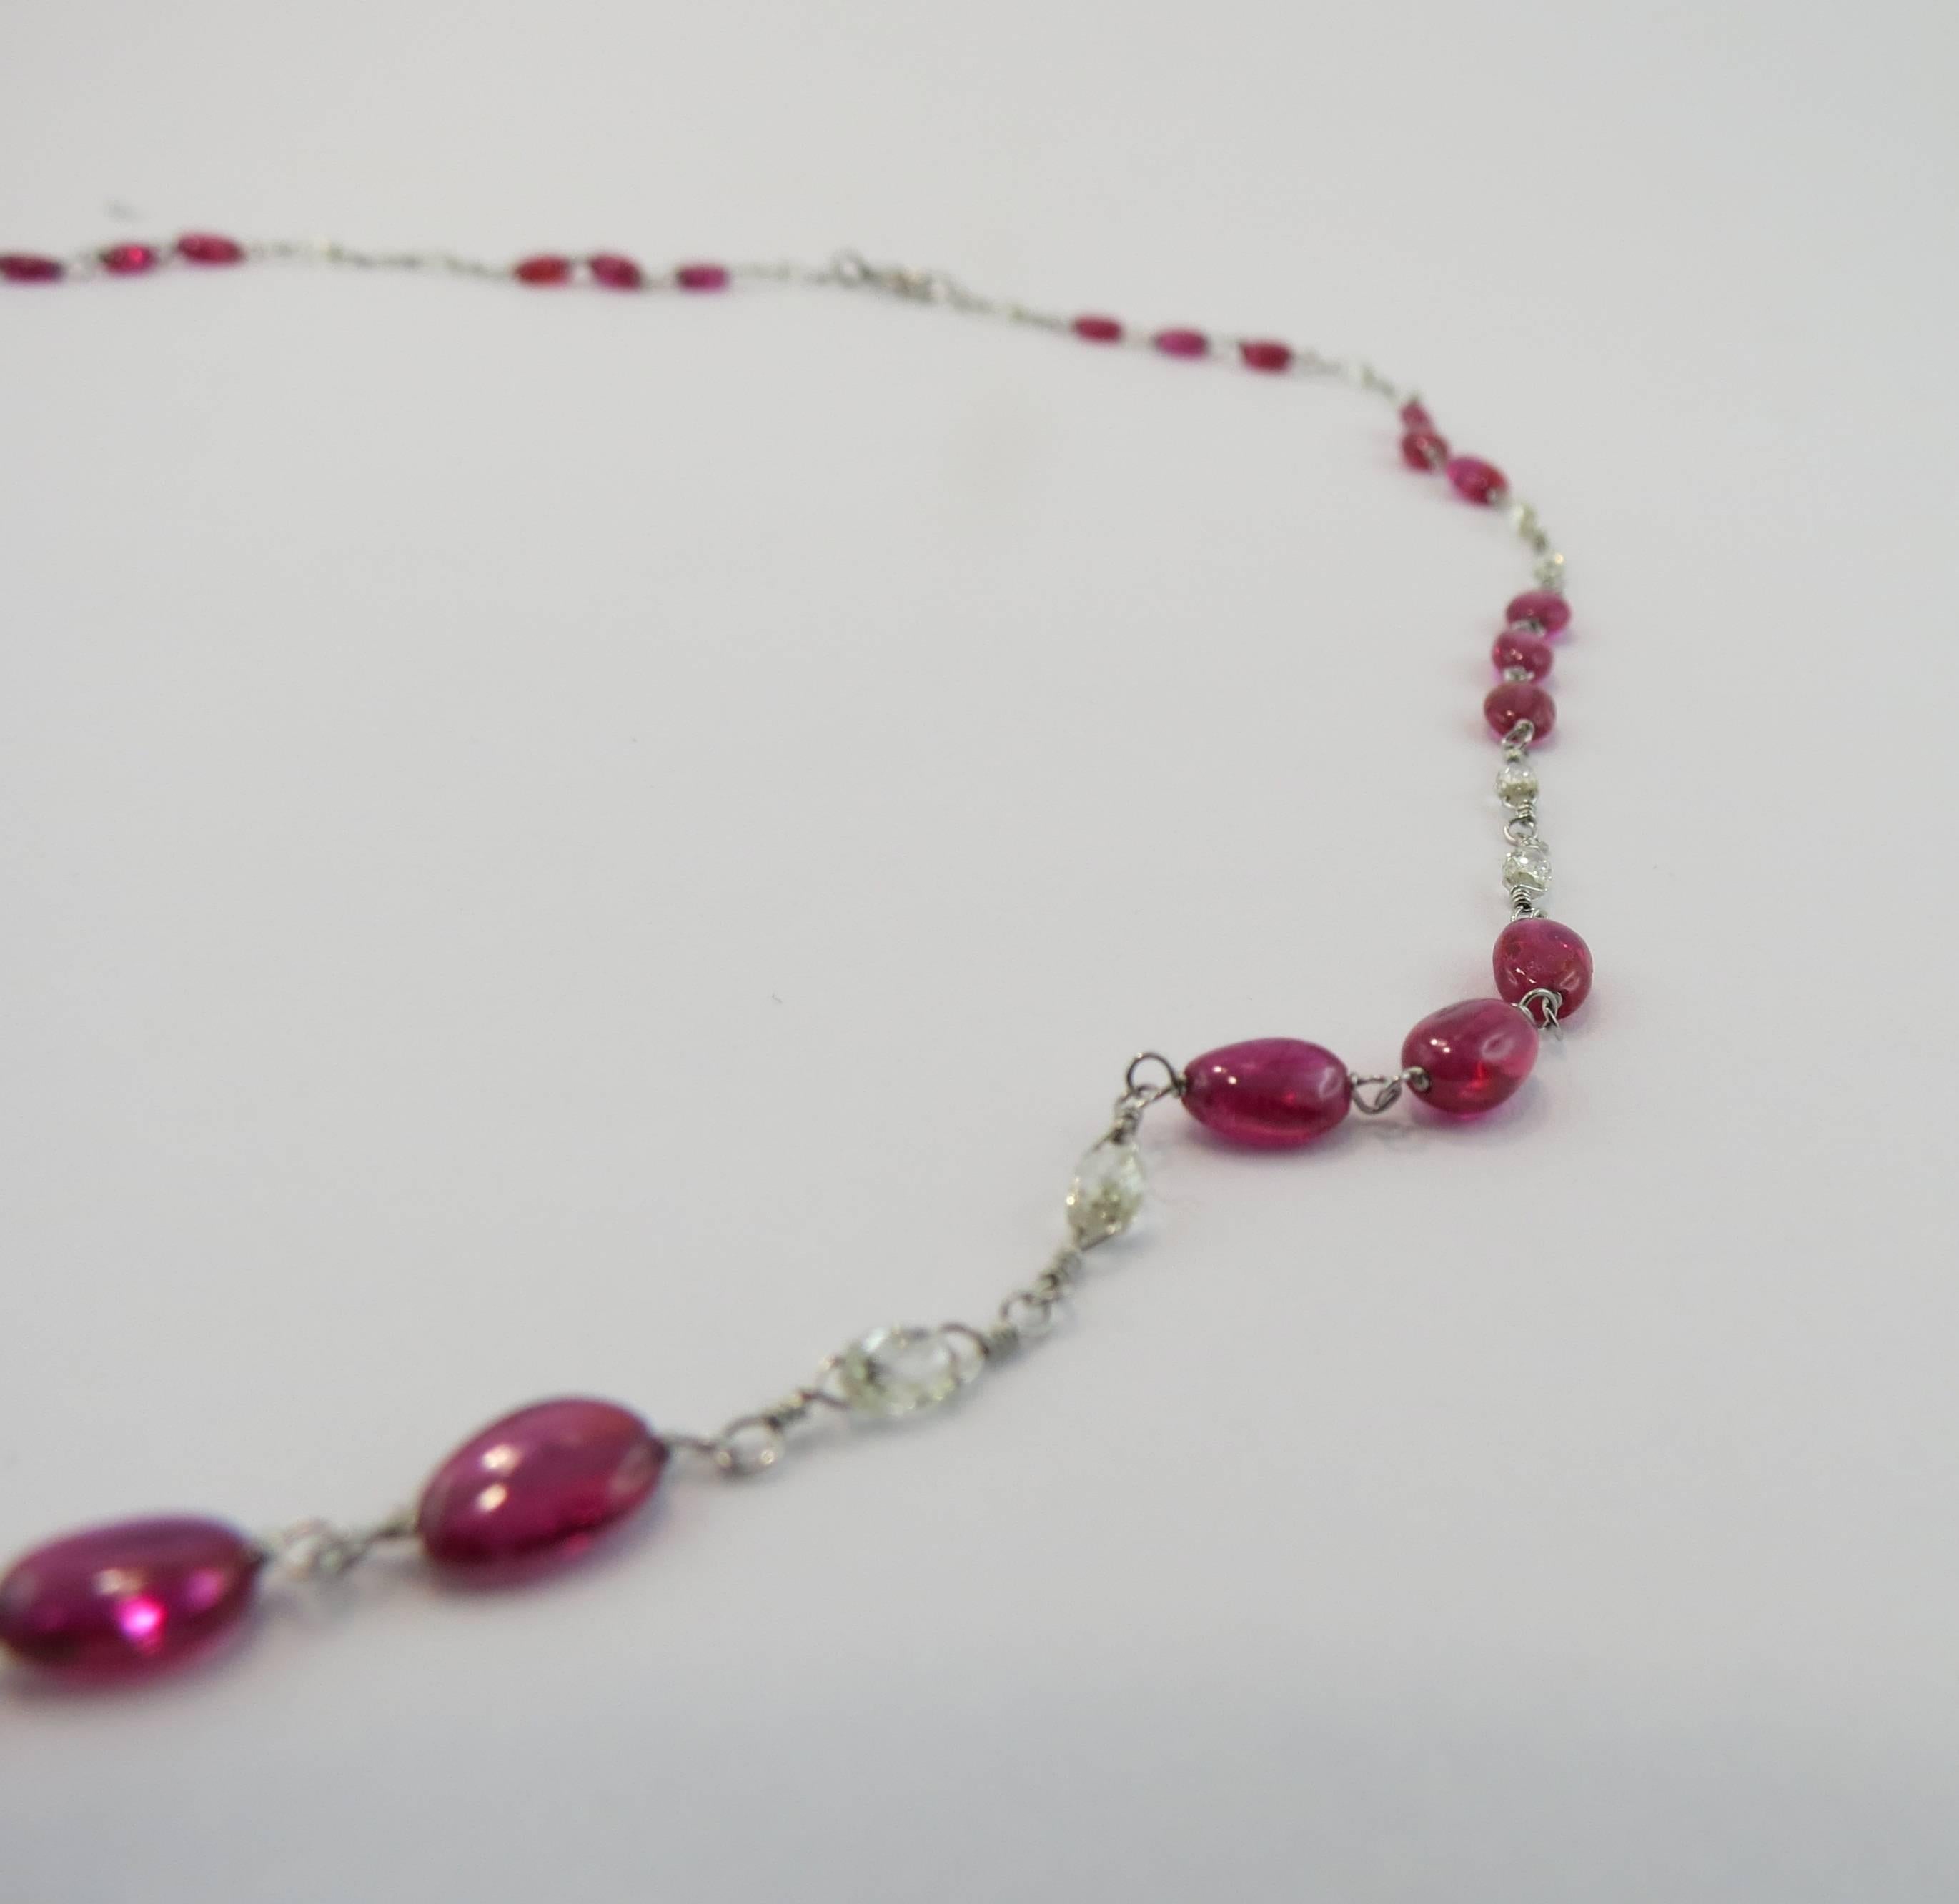 Jona Design Collection, hand crafted necklace, composed of 33 cabochon ruby beads weighing 11.13 carats set on a platinum chain with 22 oval briolette cut white diamonds weighing 1.69 carats in total.

All of our jewelry is new and has never been